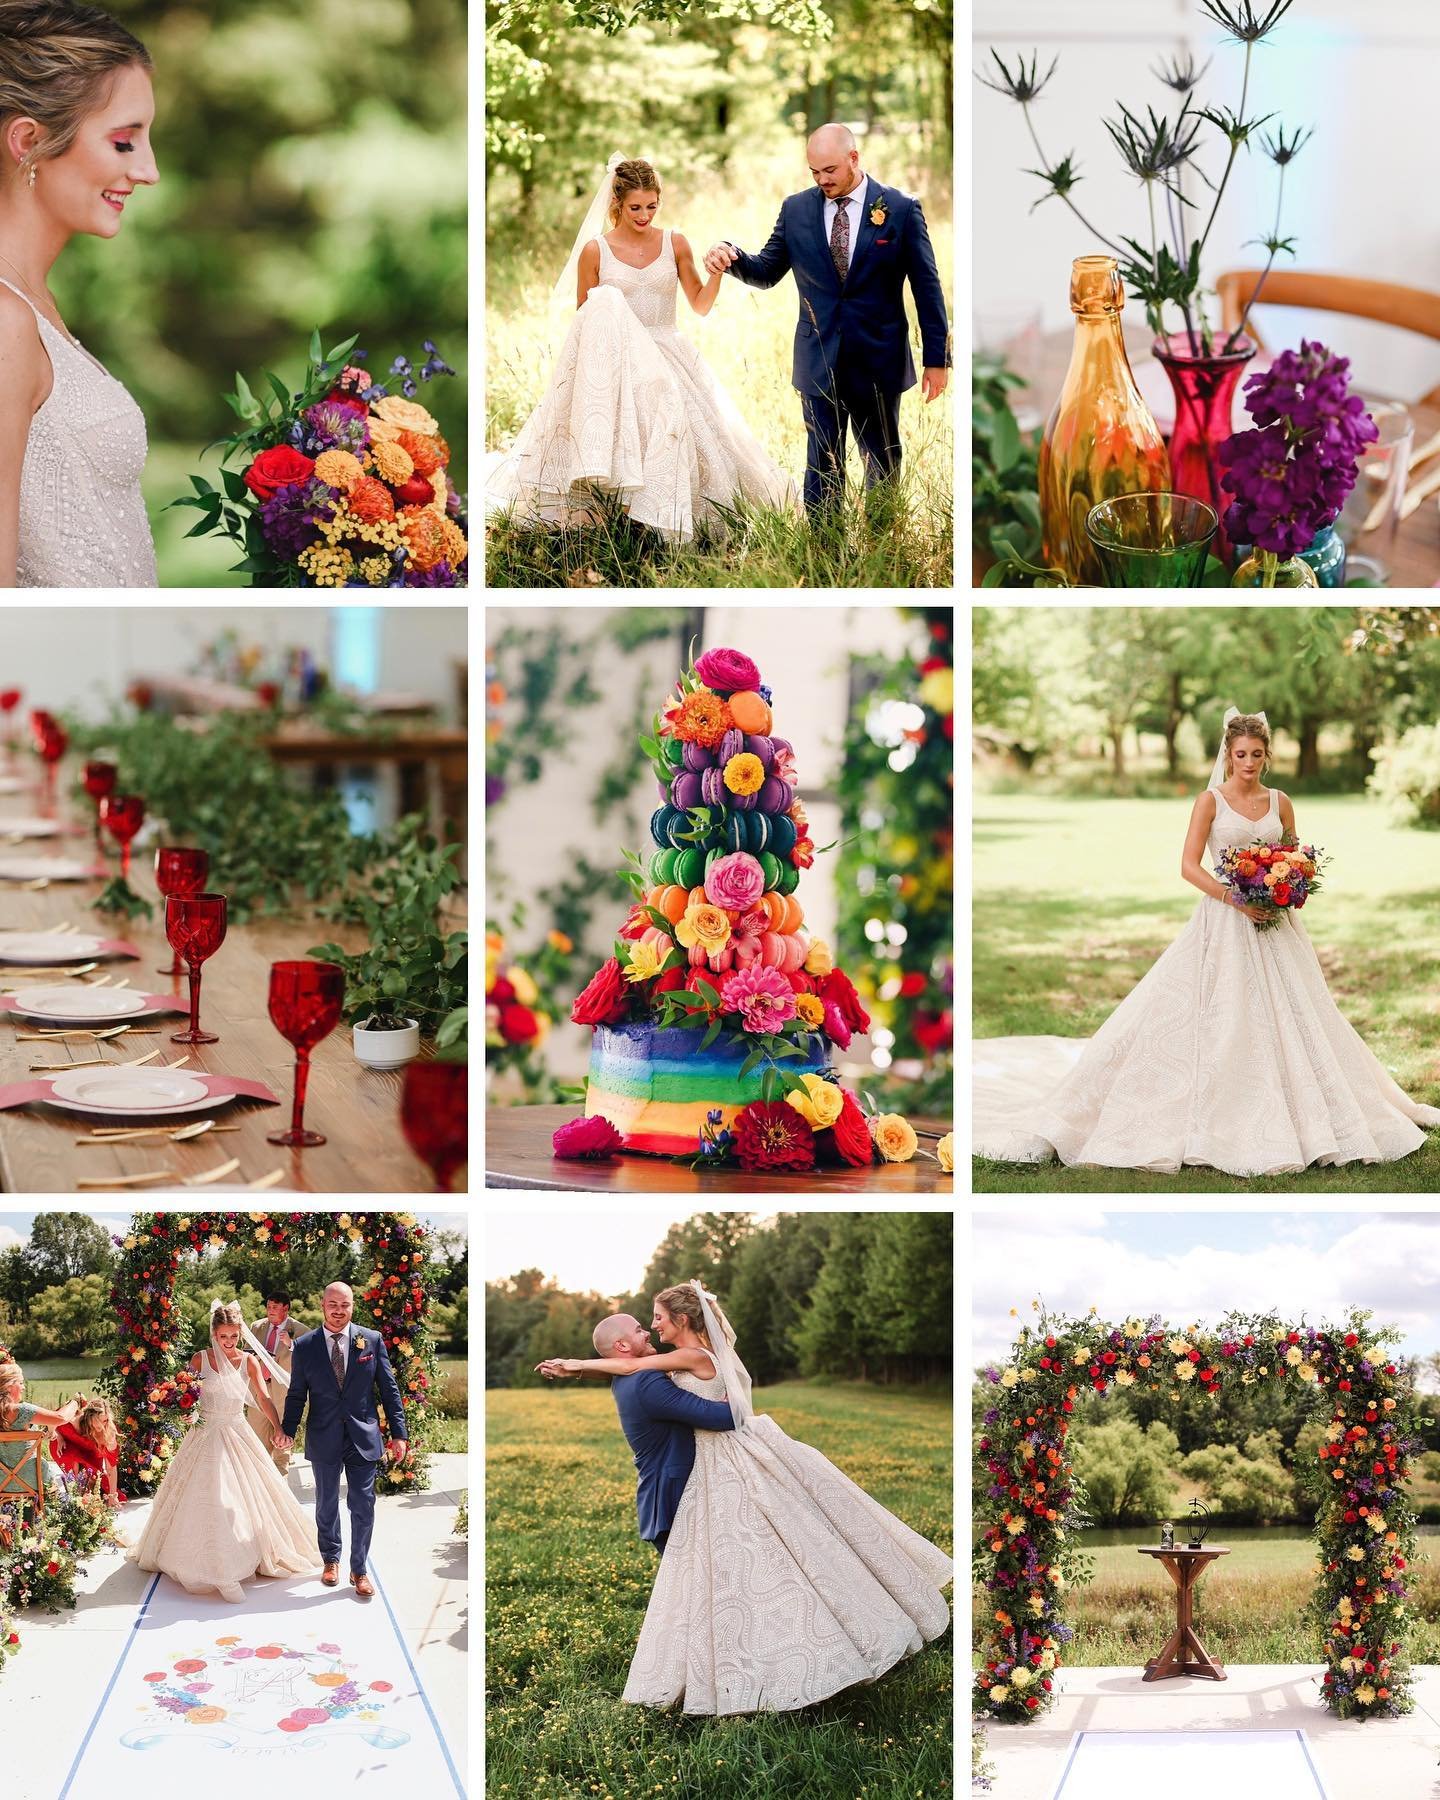 COLOR! Don&rsquo;t be afraid to add a pop or two of color to your wedding day. This wedding was over the top!!! Every i was dotted and every t was crossed. Soooo much thought and planning! It was so elegant but so fun at the same time. There was this